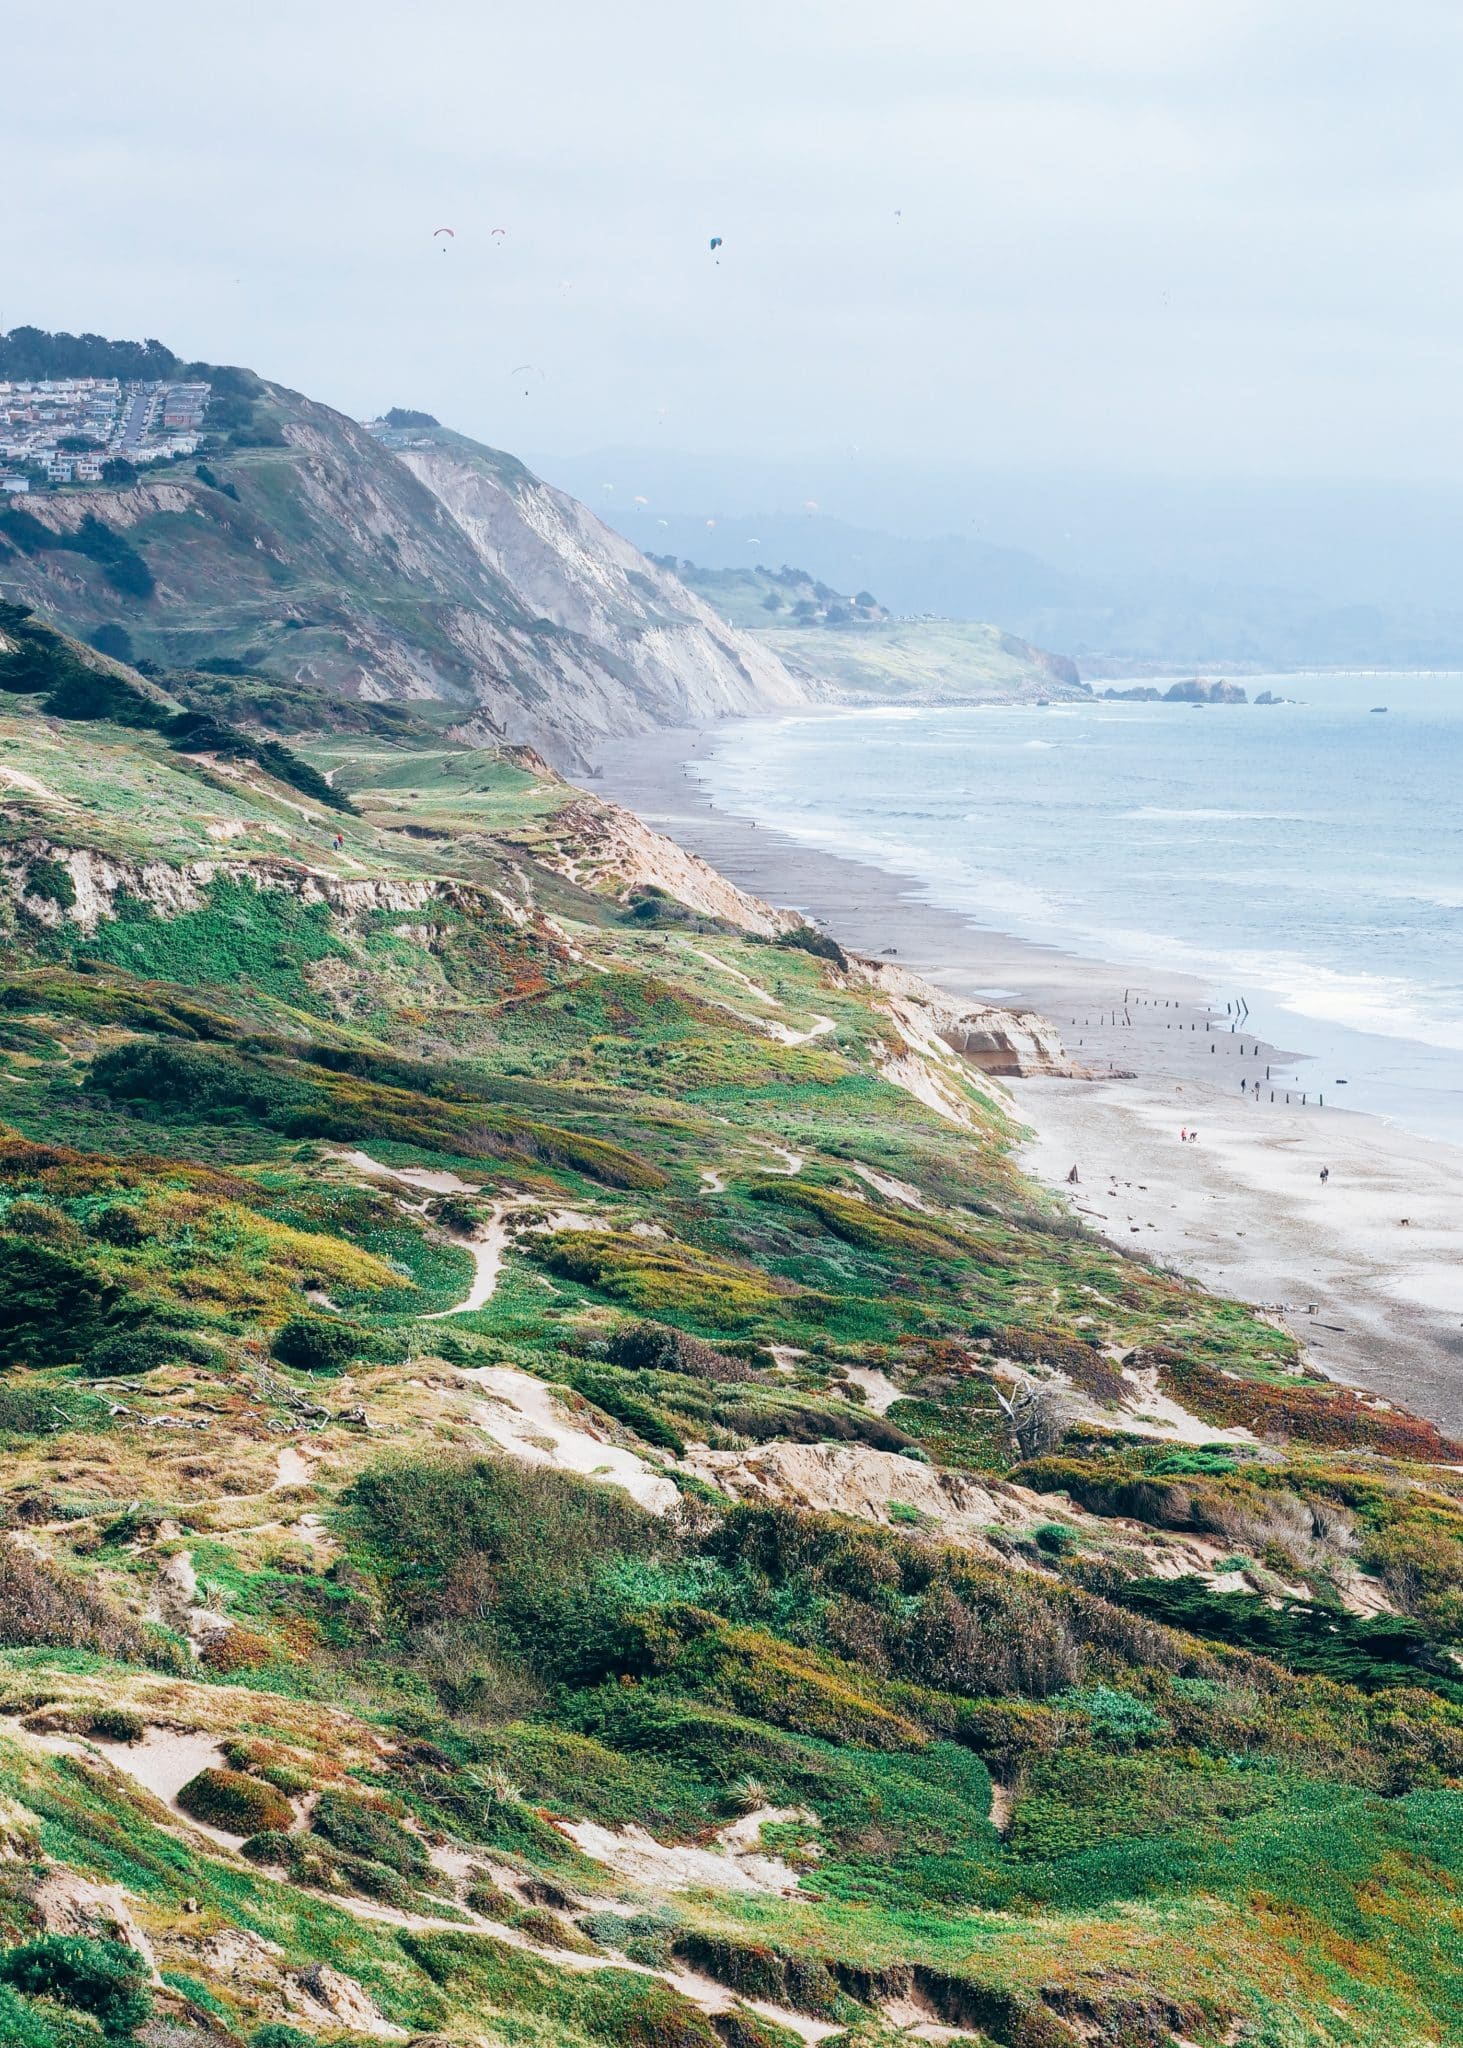 Funston Beach featuring the green trails and bluffs leading to the shore.